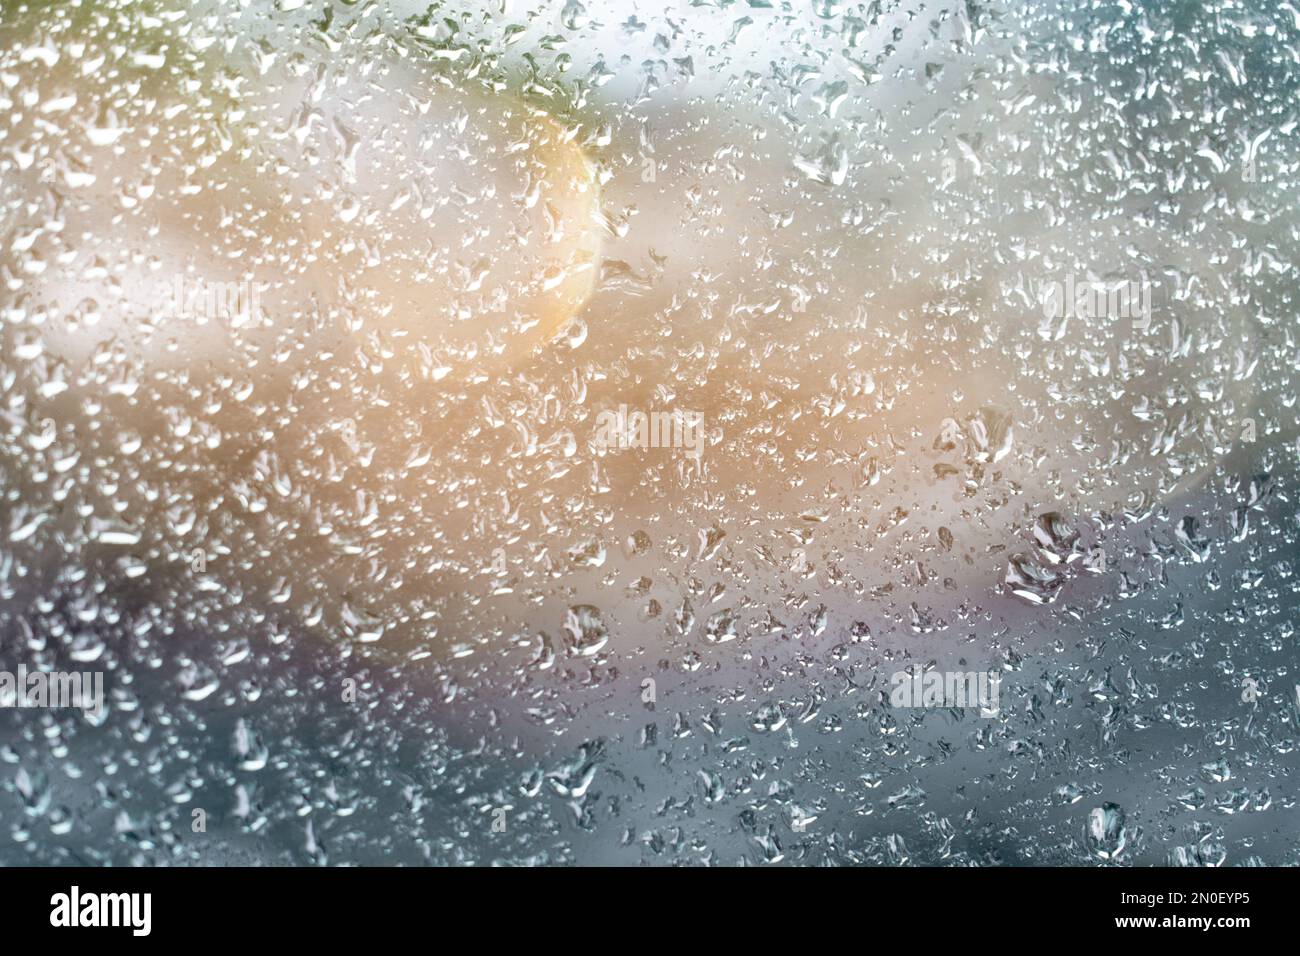 Water drops on the window Stock Photo